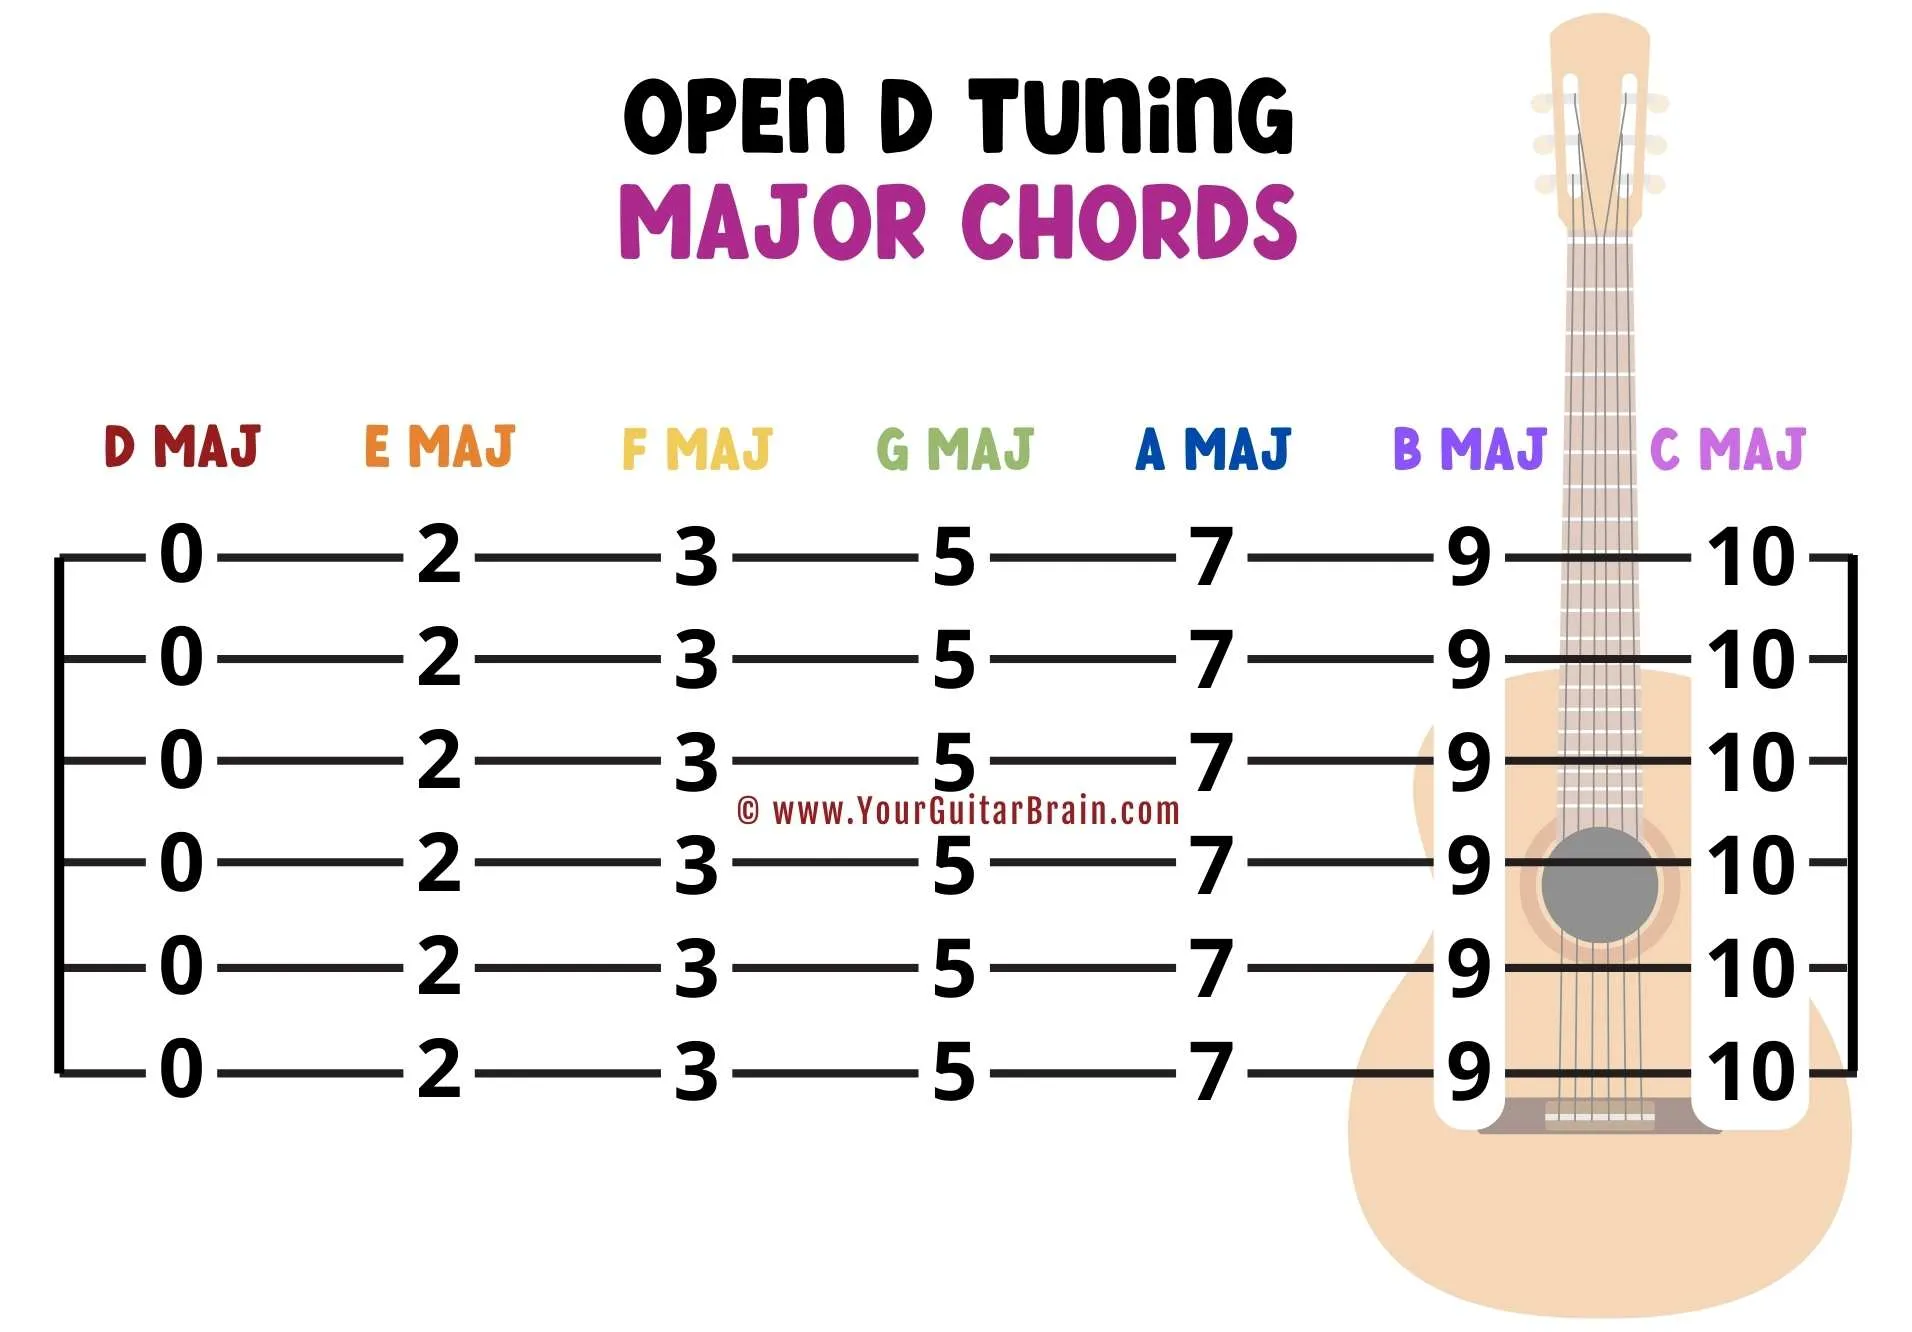 Open D Tuning Major Chords for guitar